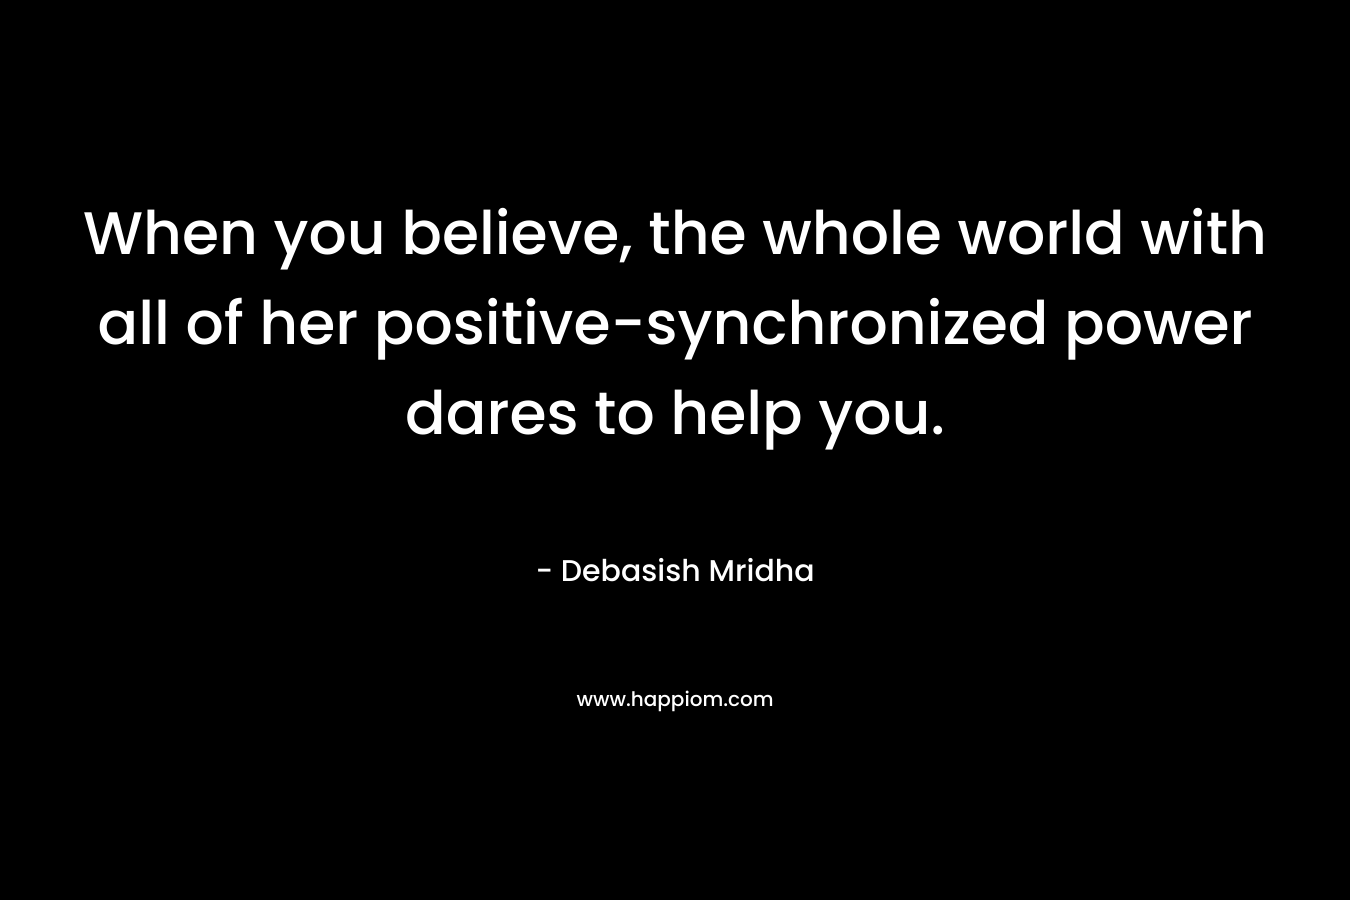 When you believe, the whole world with all of her positive-synchronized power dares to help you.